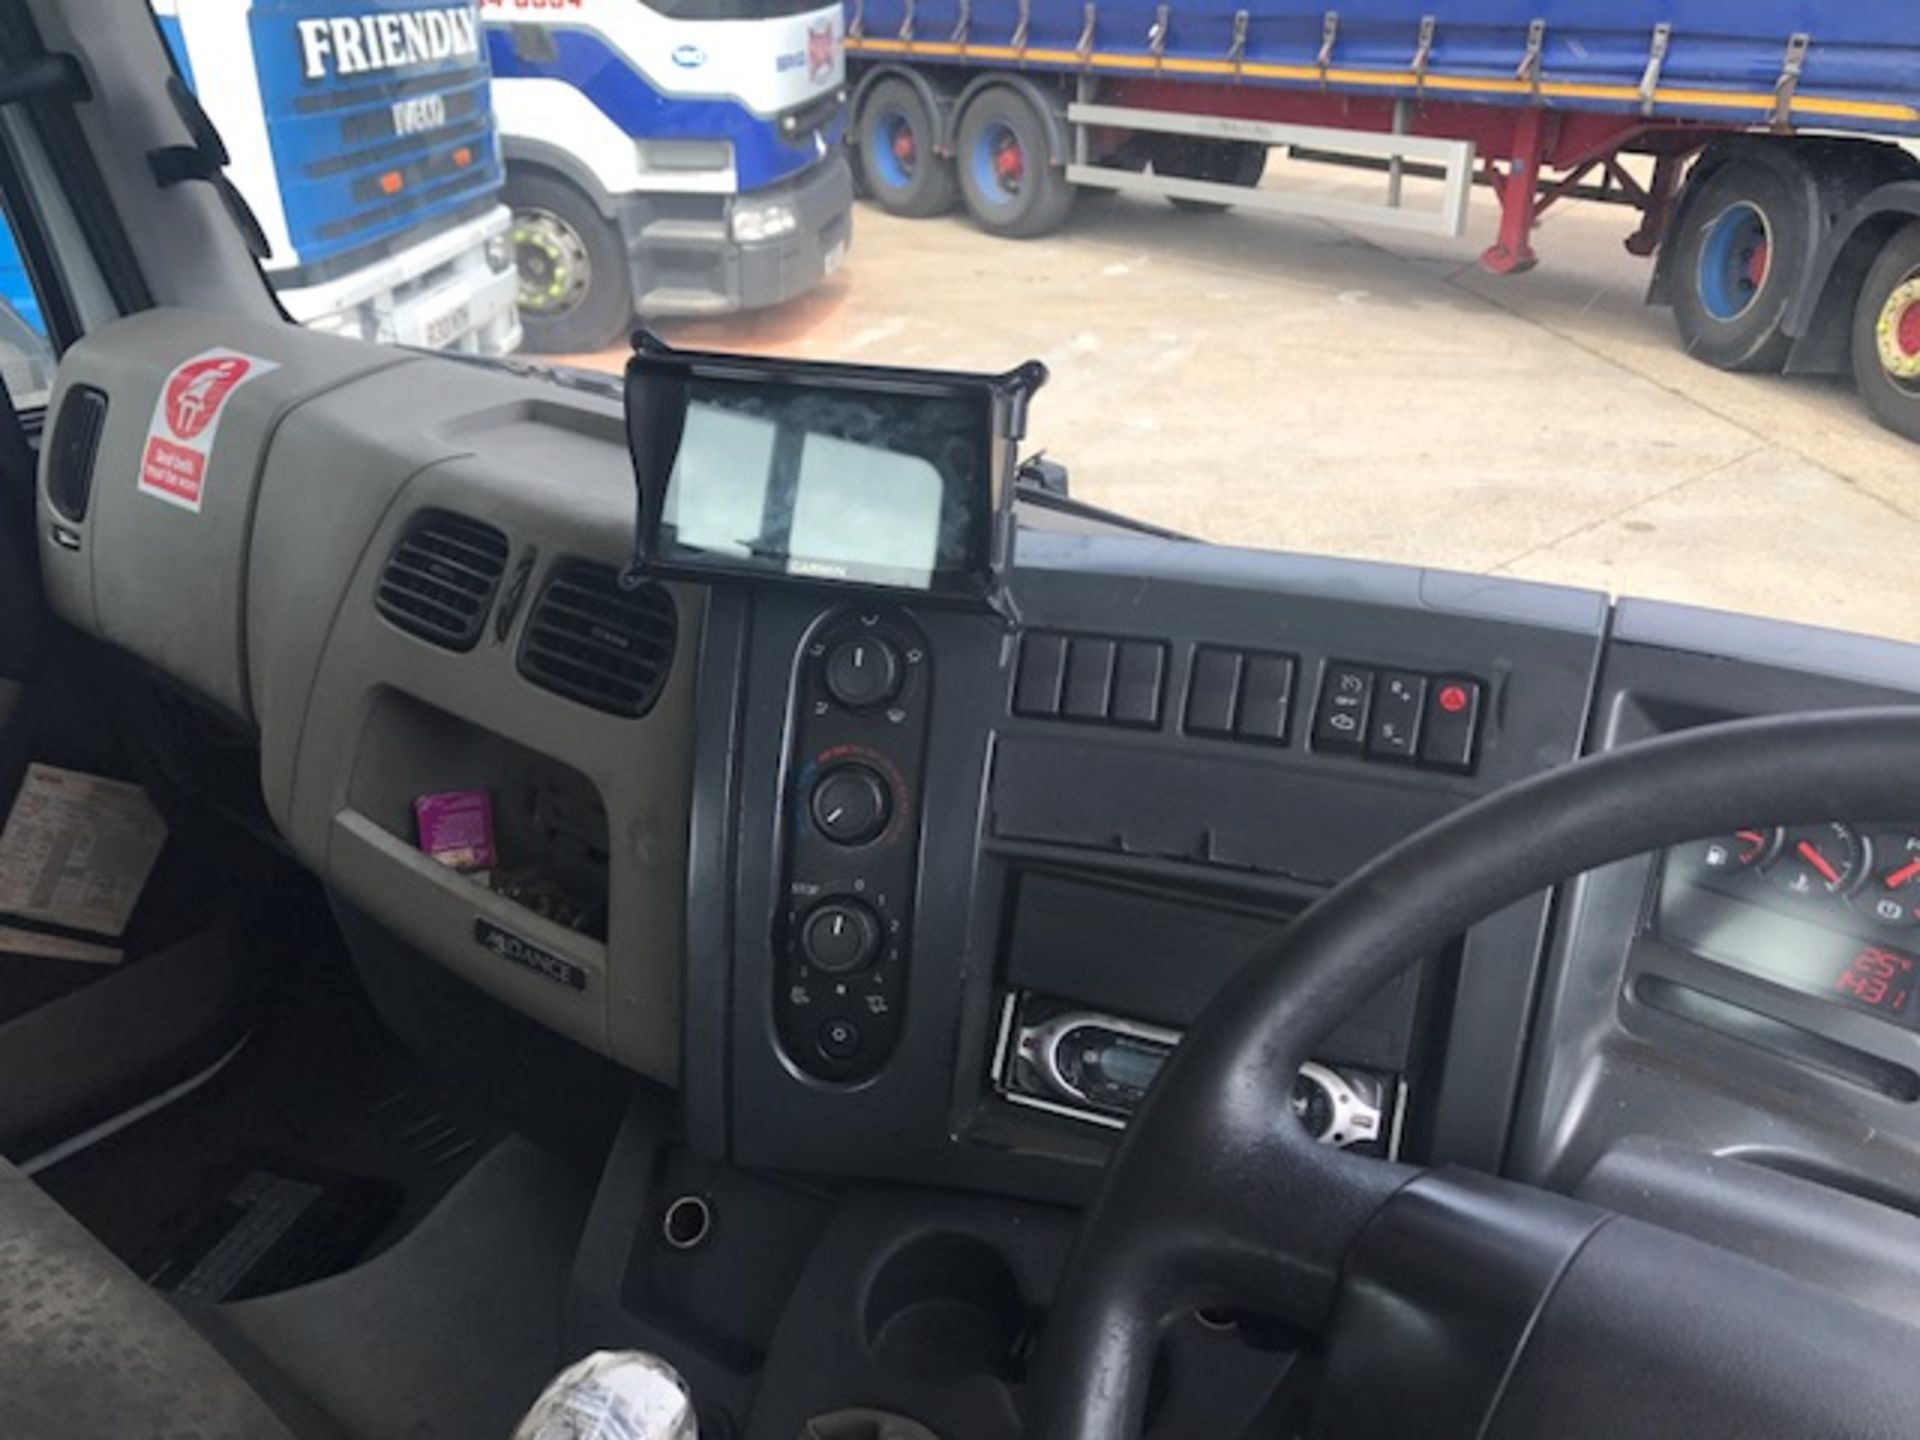 2007 Renault Midlum 10T day cab breakdown recovery vehicle complete with built in Garmin satnav with - Image 11 of 15